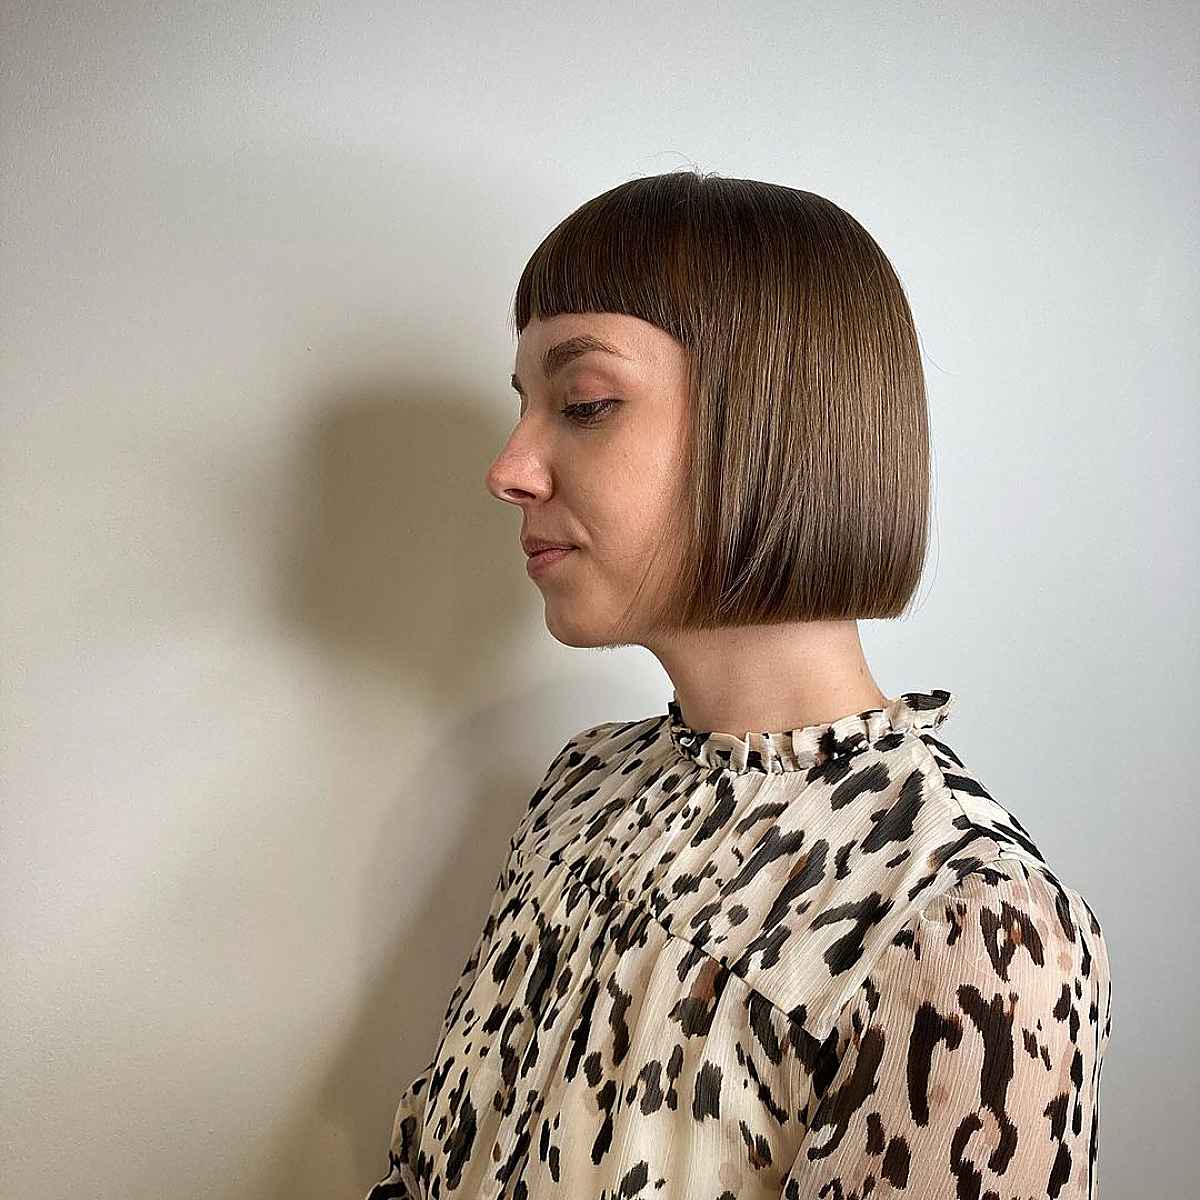 15 Remarkable Chin-Length Bob with Bangs to Consider for Your Next Cut